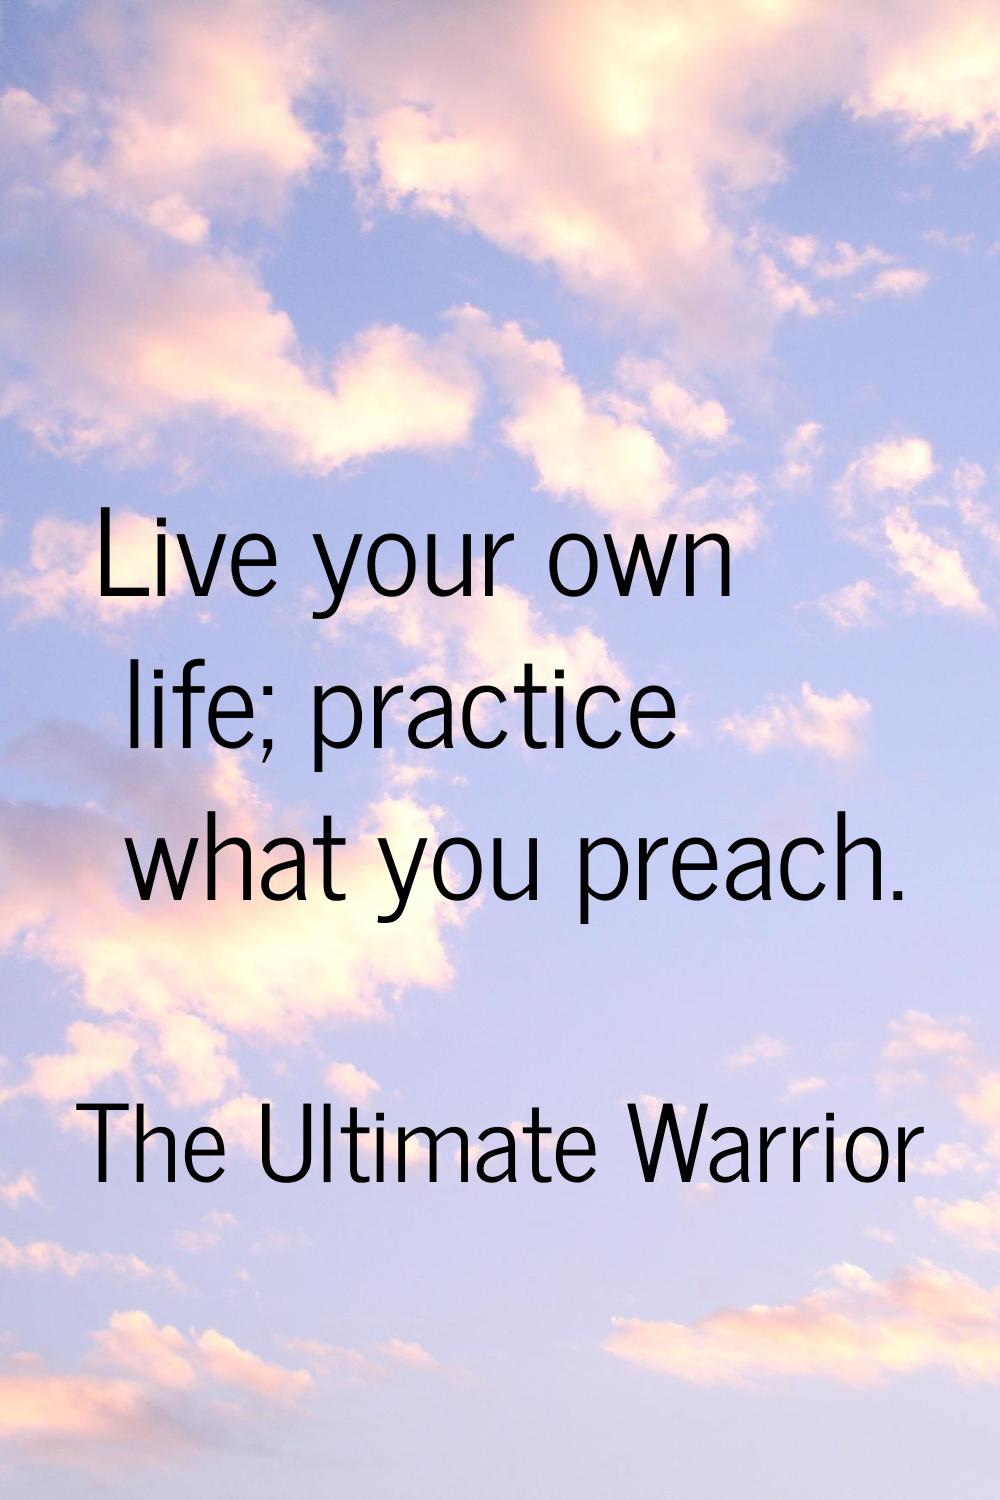 Live your own life; practice what you preach.